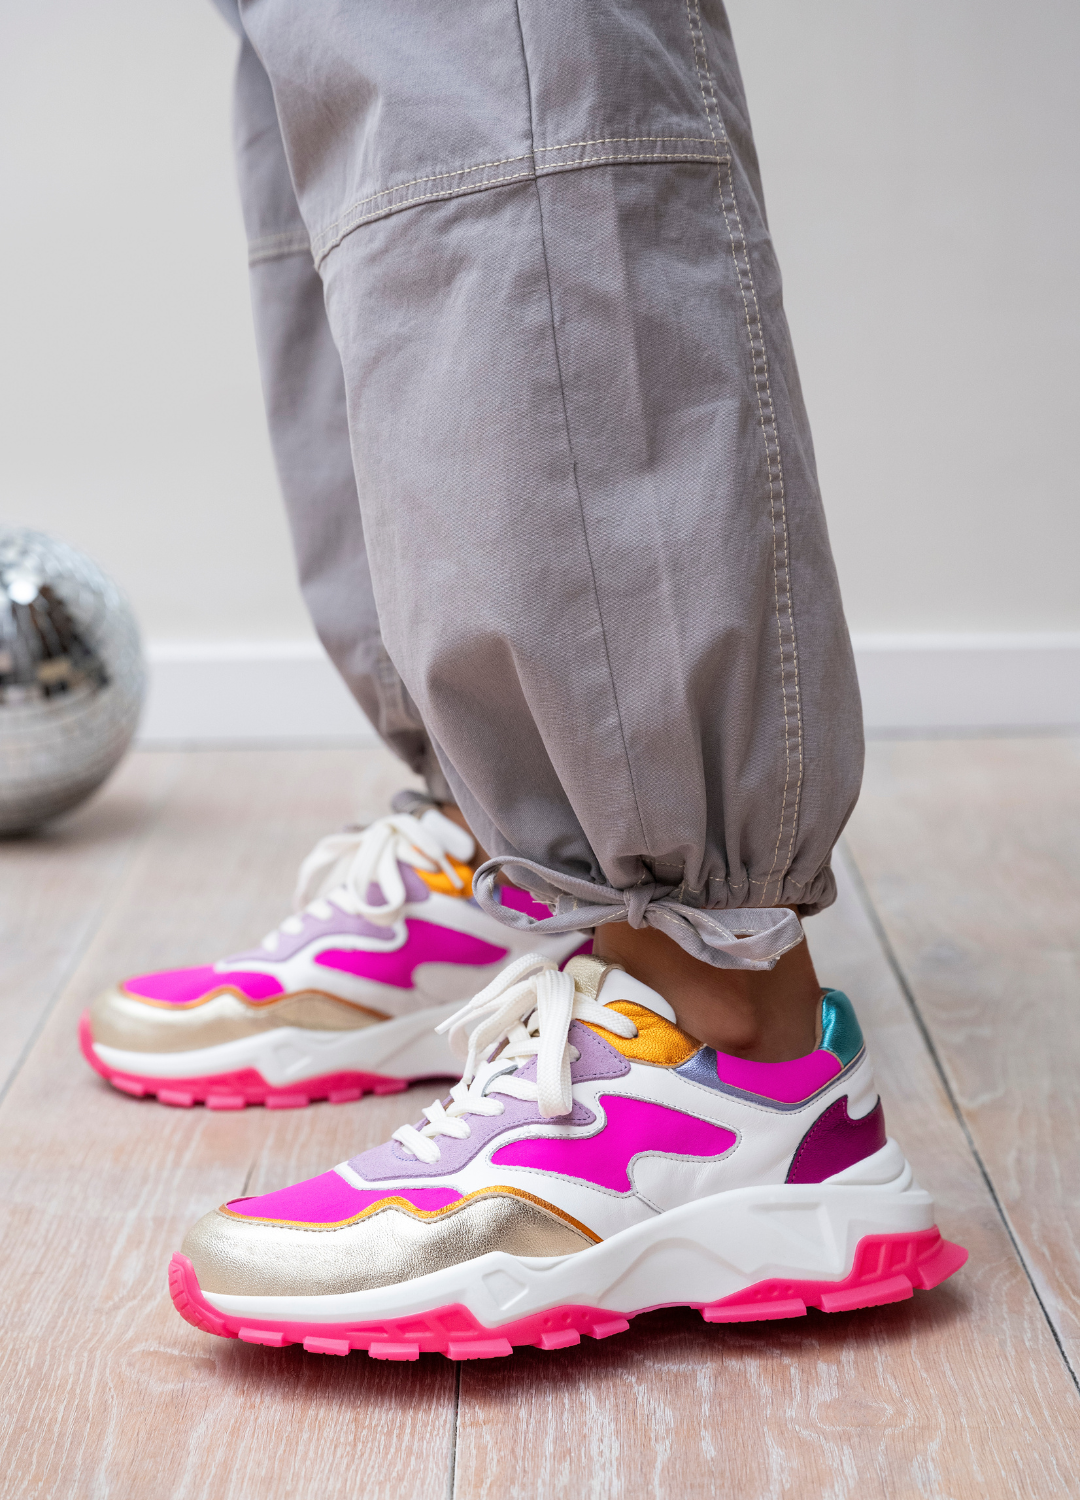 DWRS | CHESTER SNEAKERS - WHITE/NEON PINK